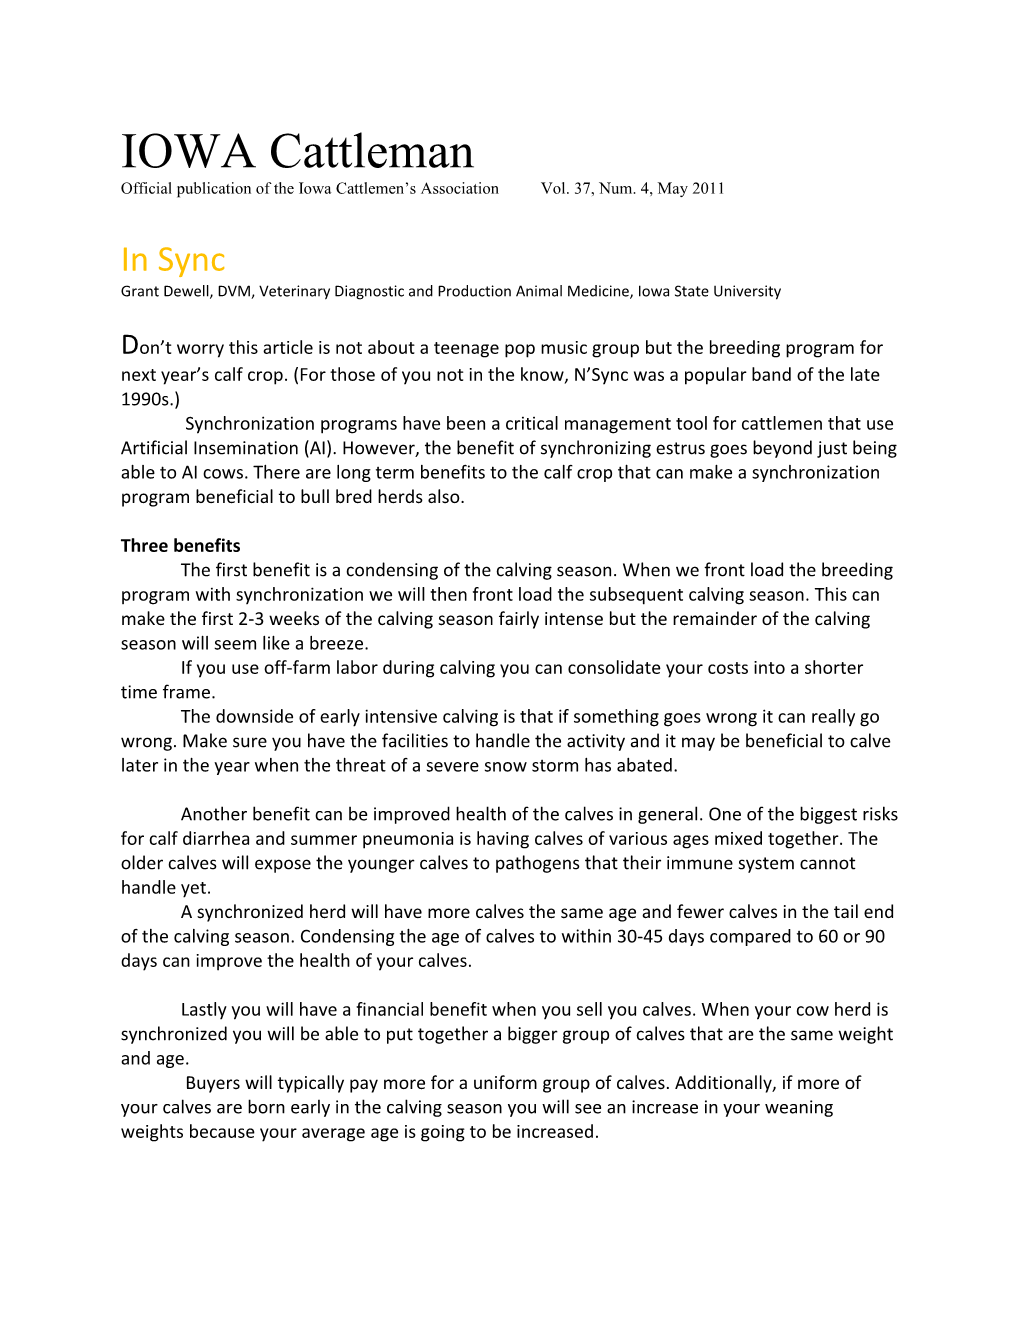 Official Publication of the Iowa Cattlemen S Association Vol. 37, Num. 4, May 2011